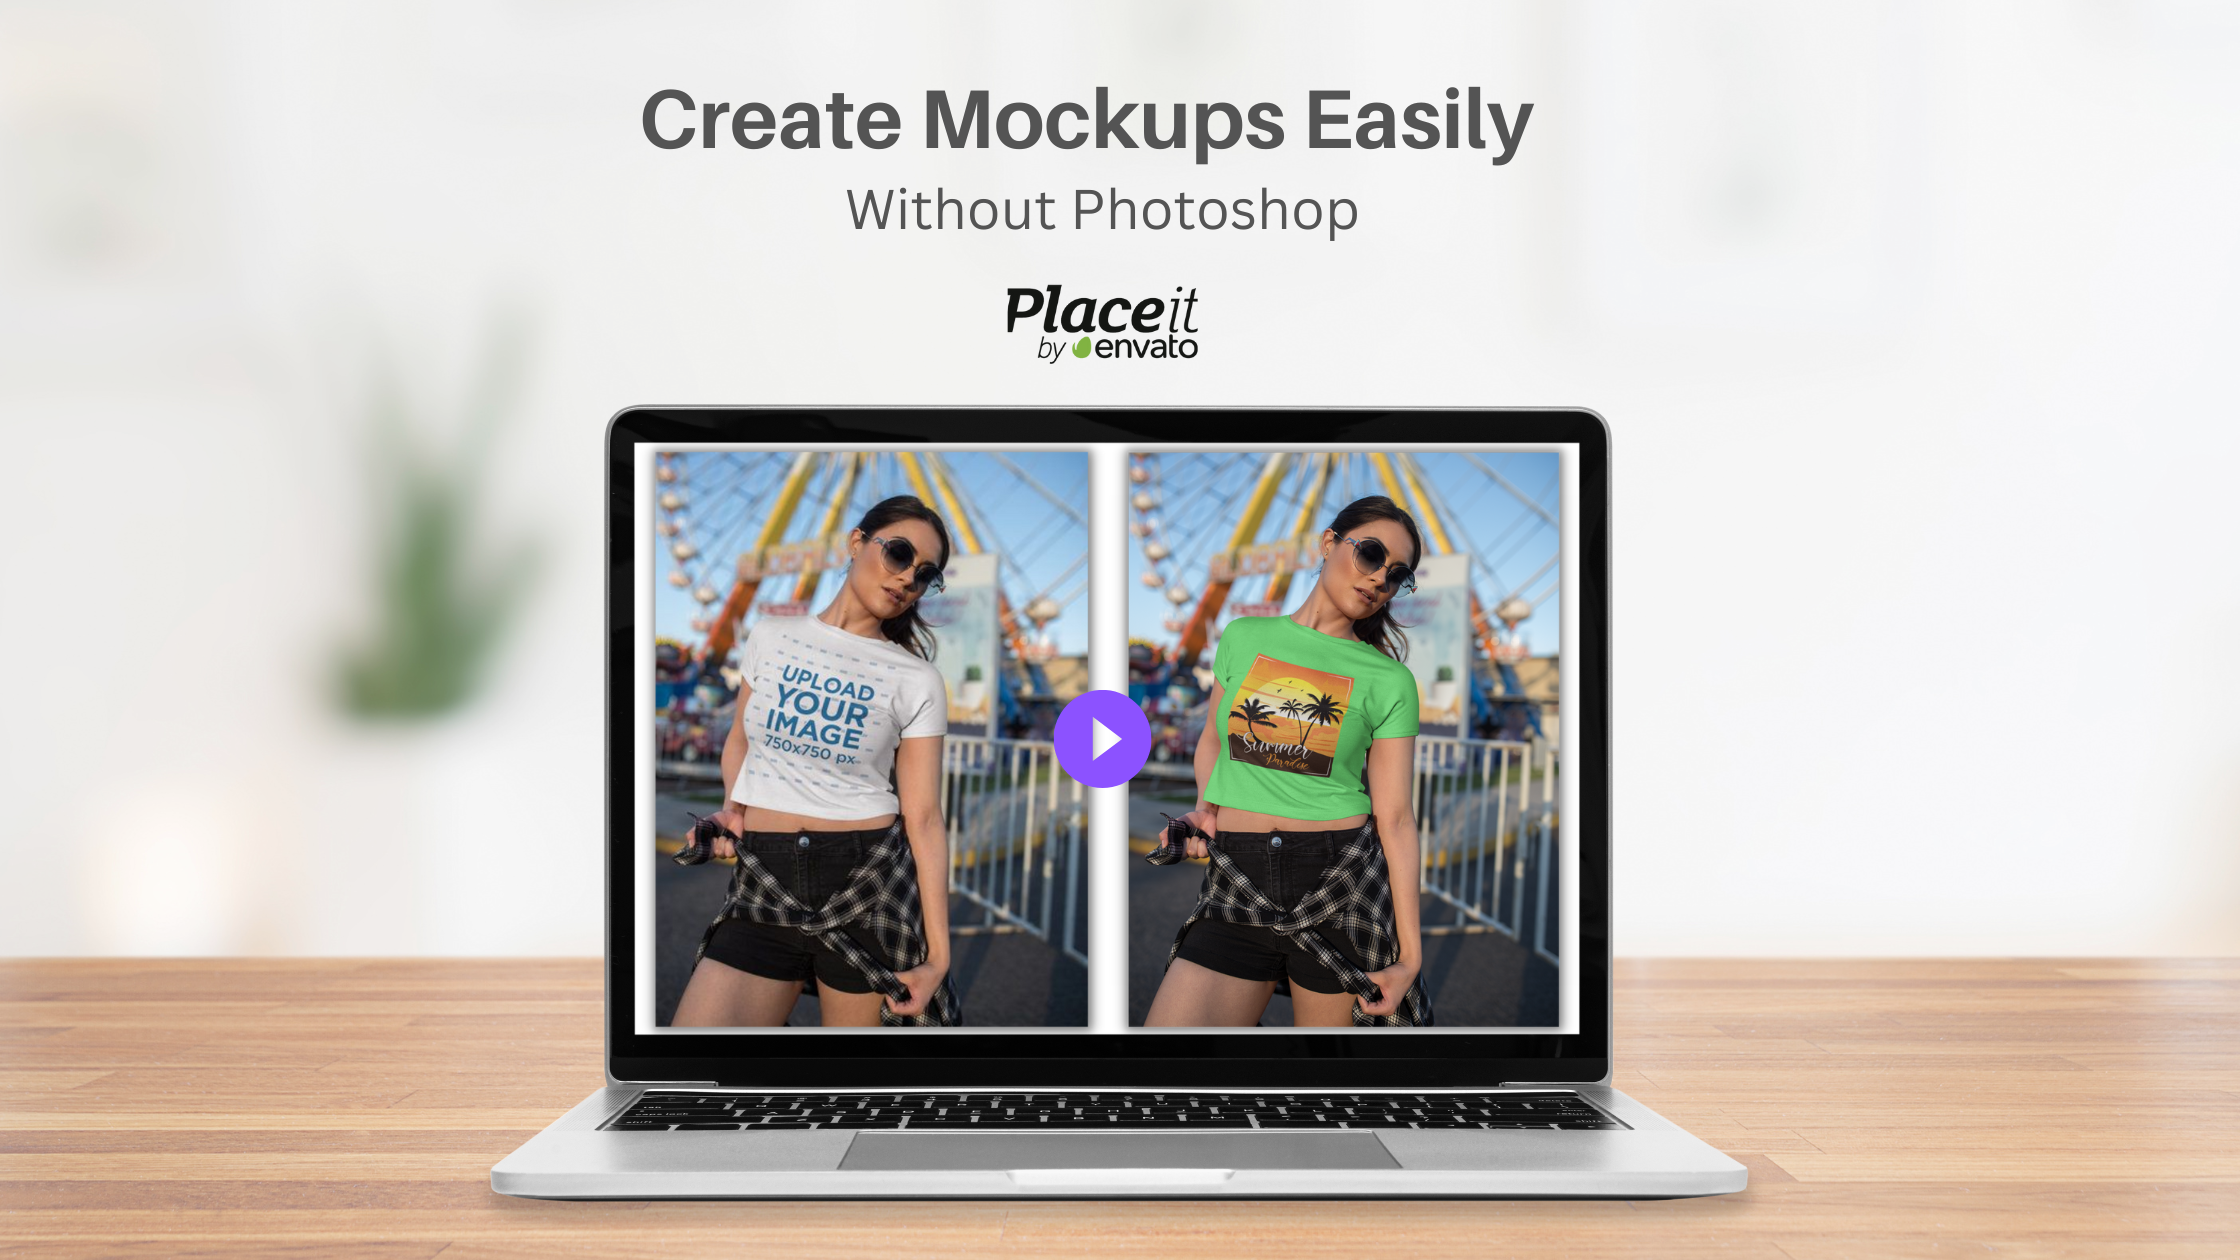 How to create or edit mockups without photoshop